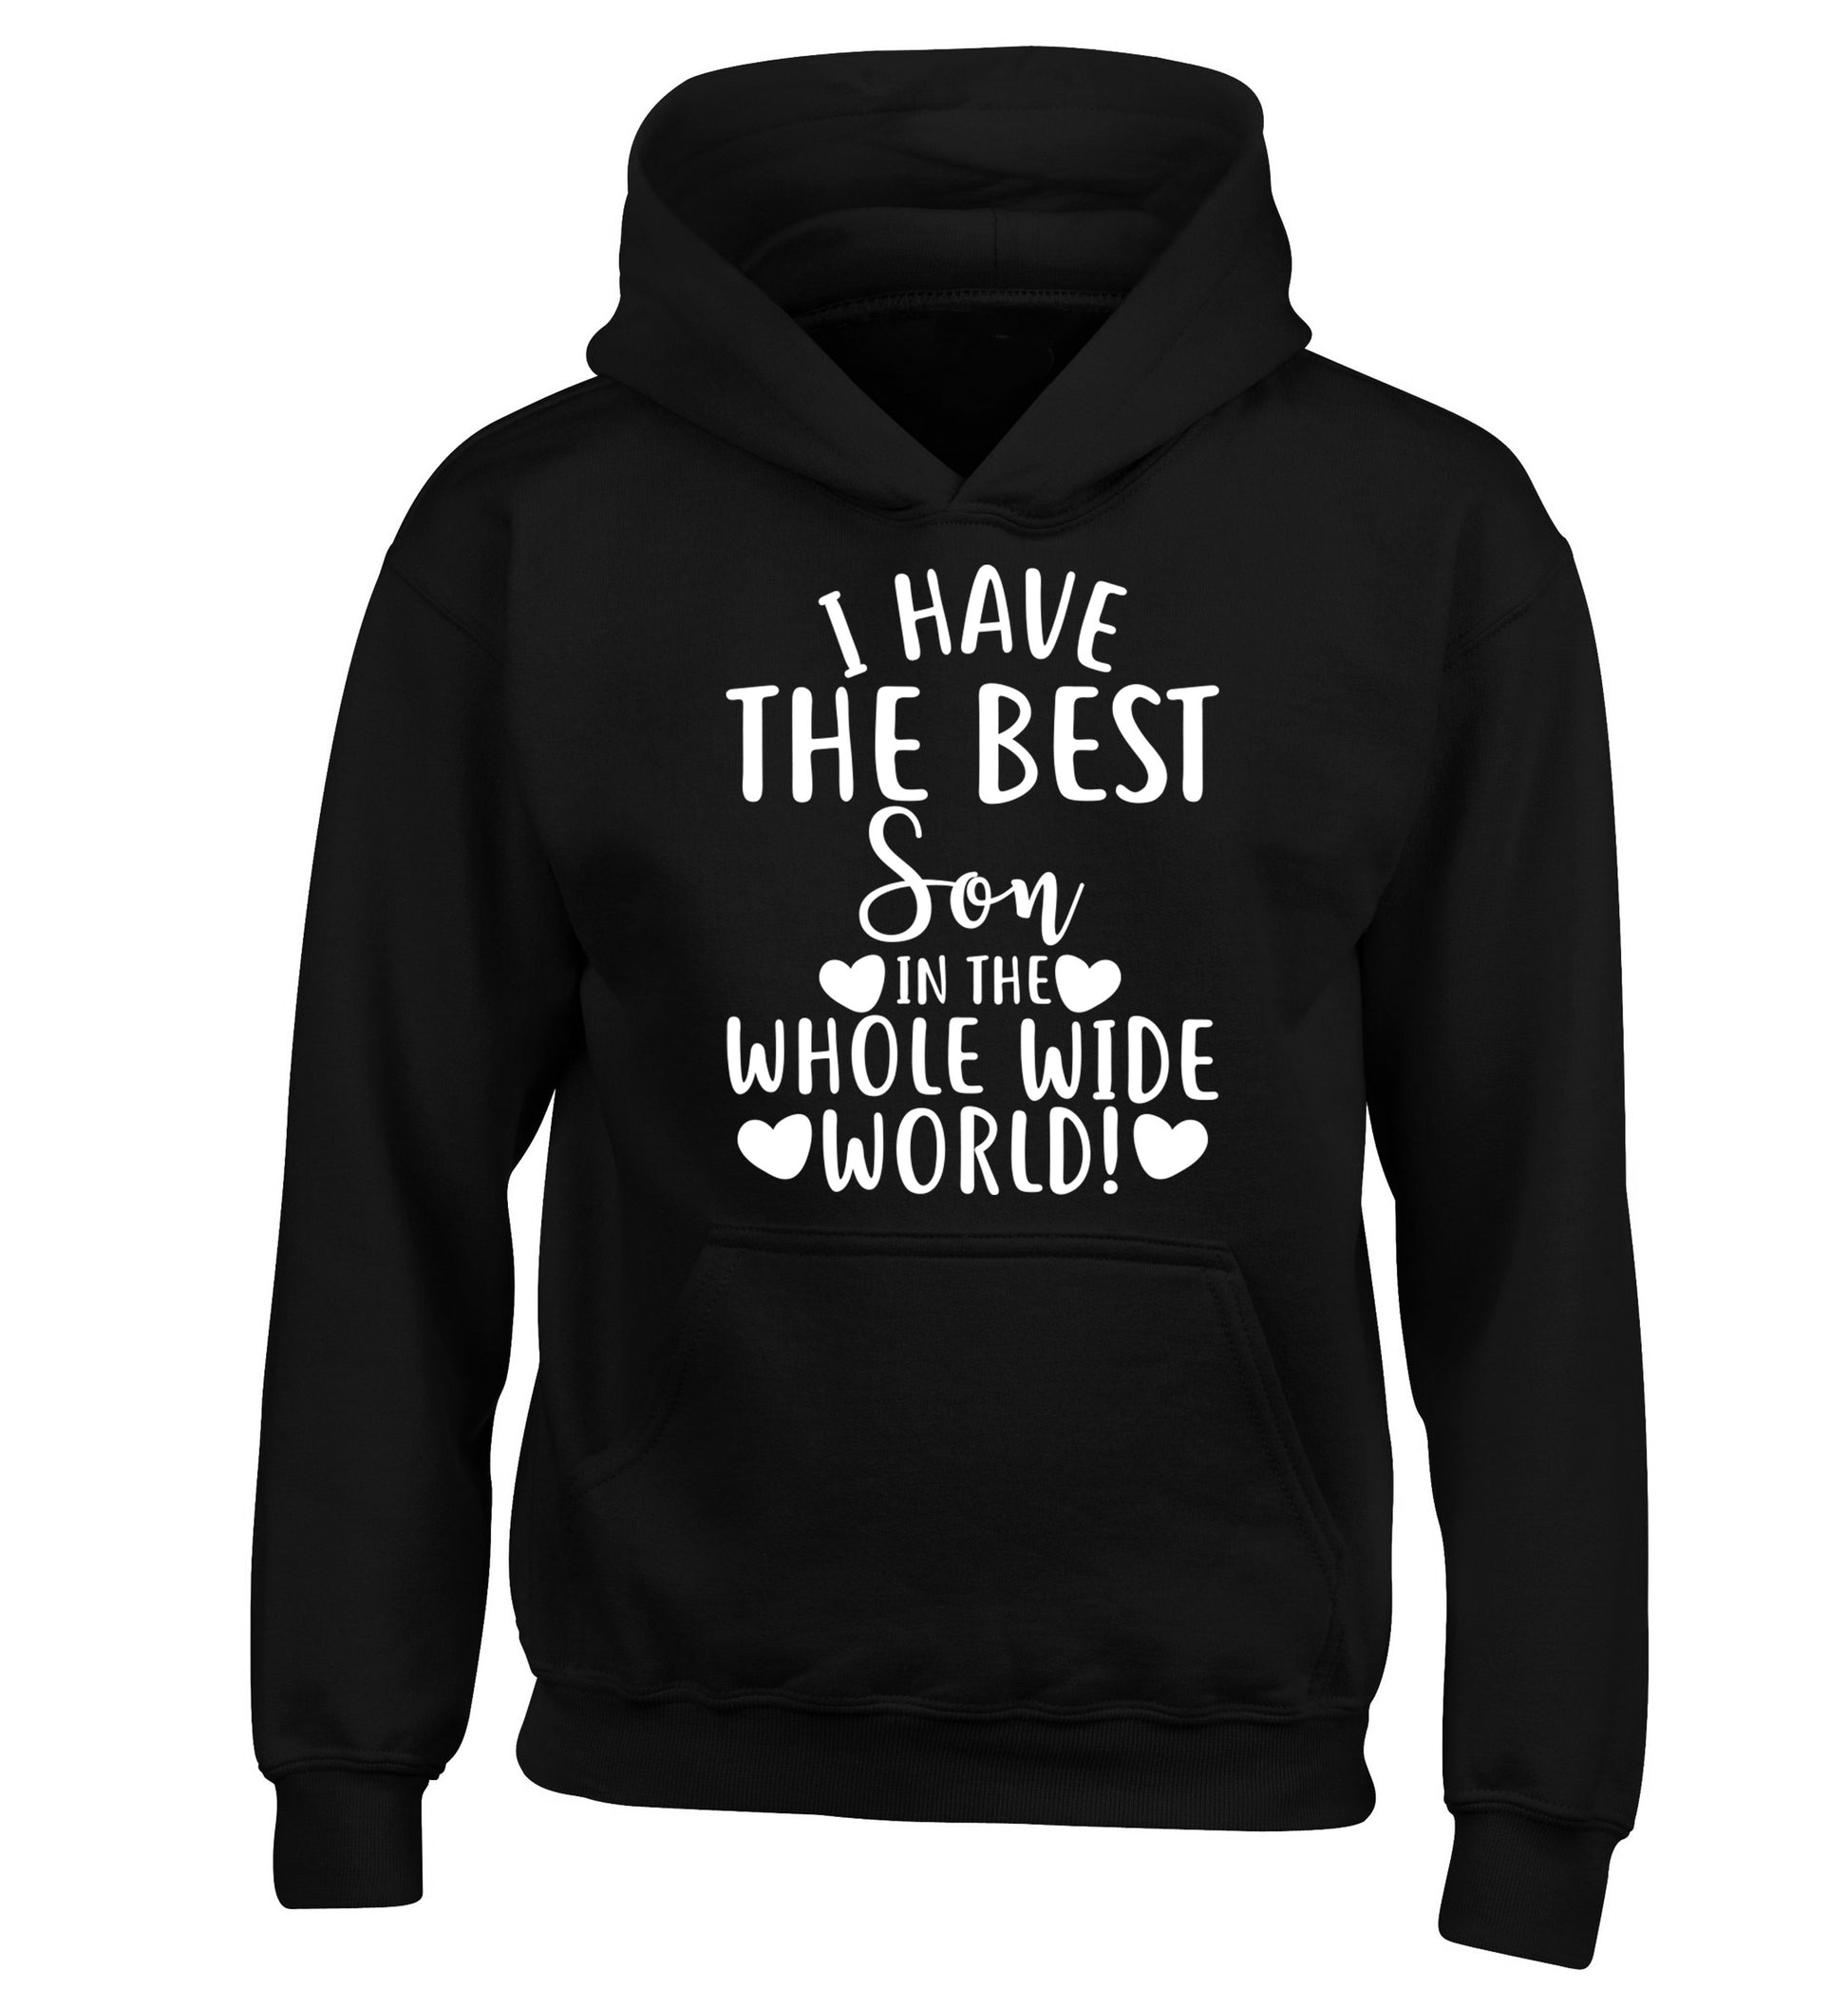 I have the best son in the whole wide world! children's black hoodie 12-13 Years